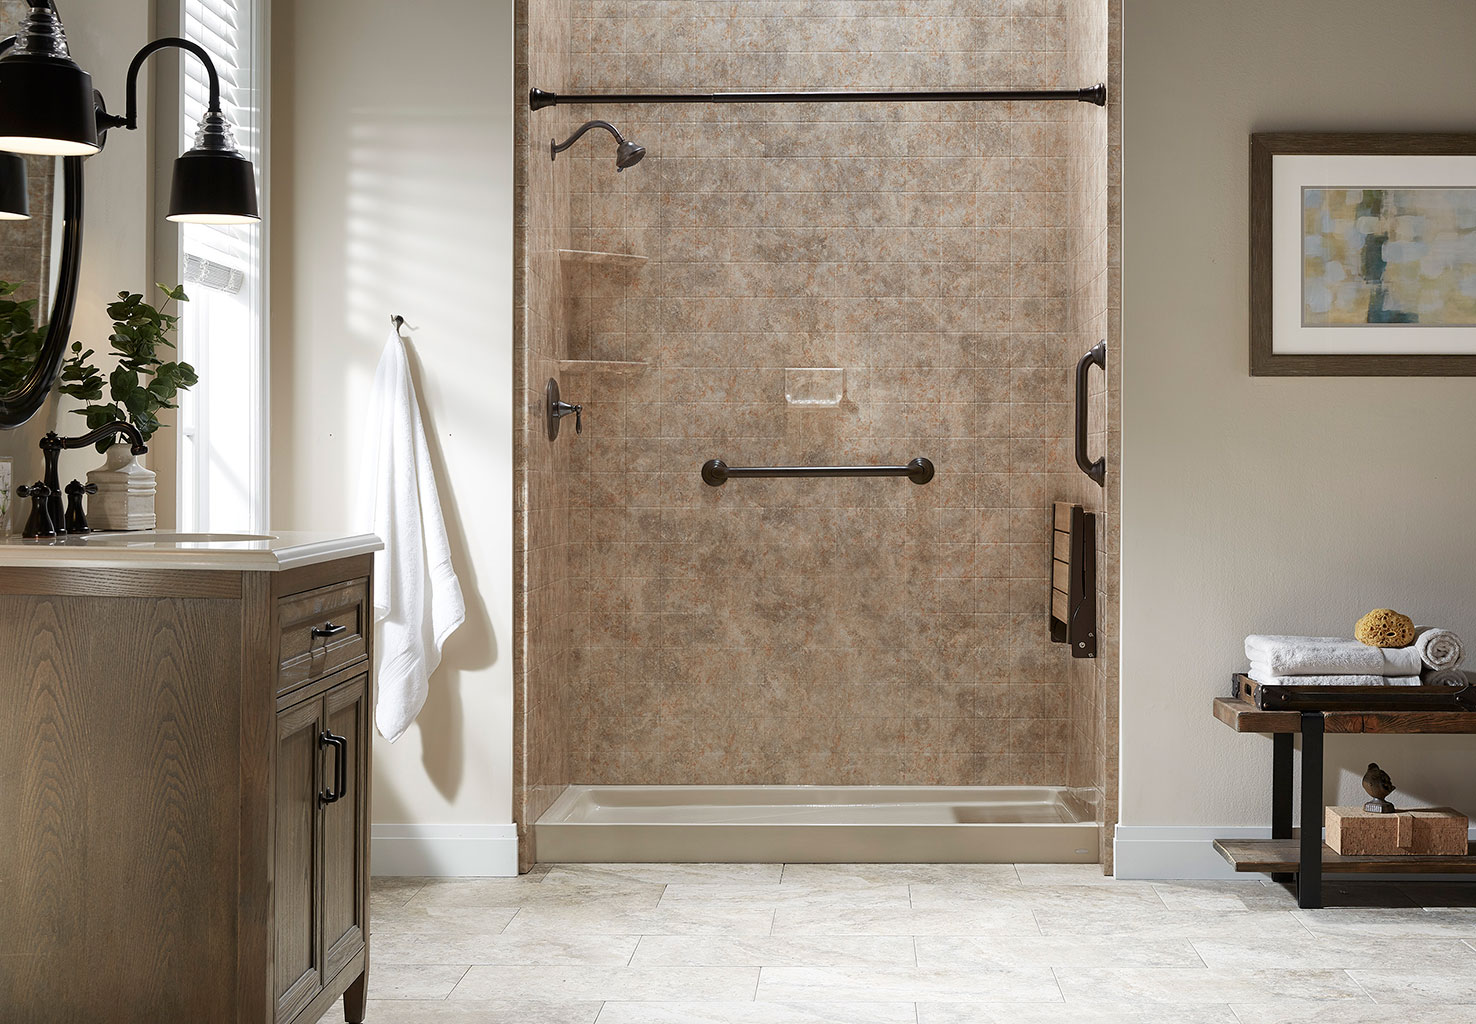 How Much Space Is Needed for  Walk-In Shower?